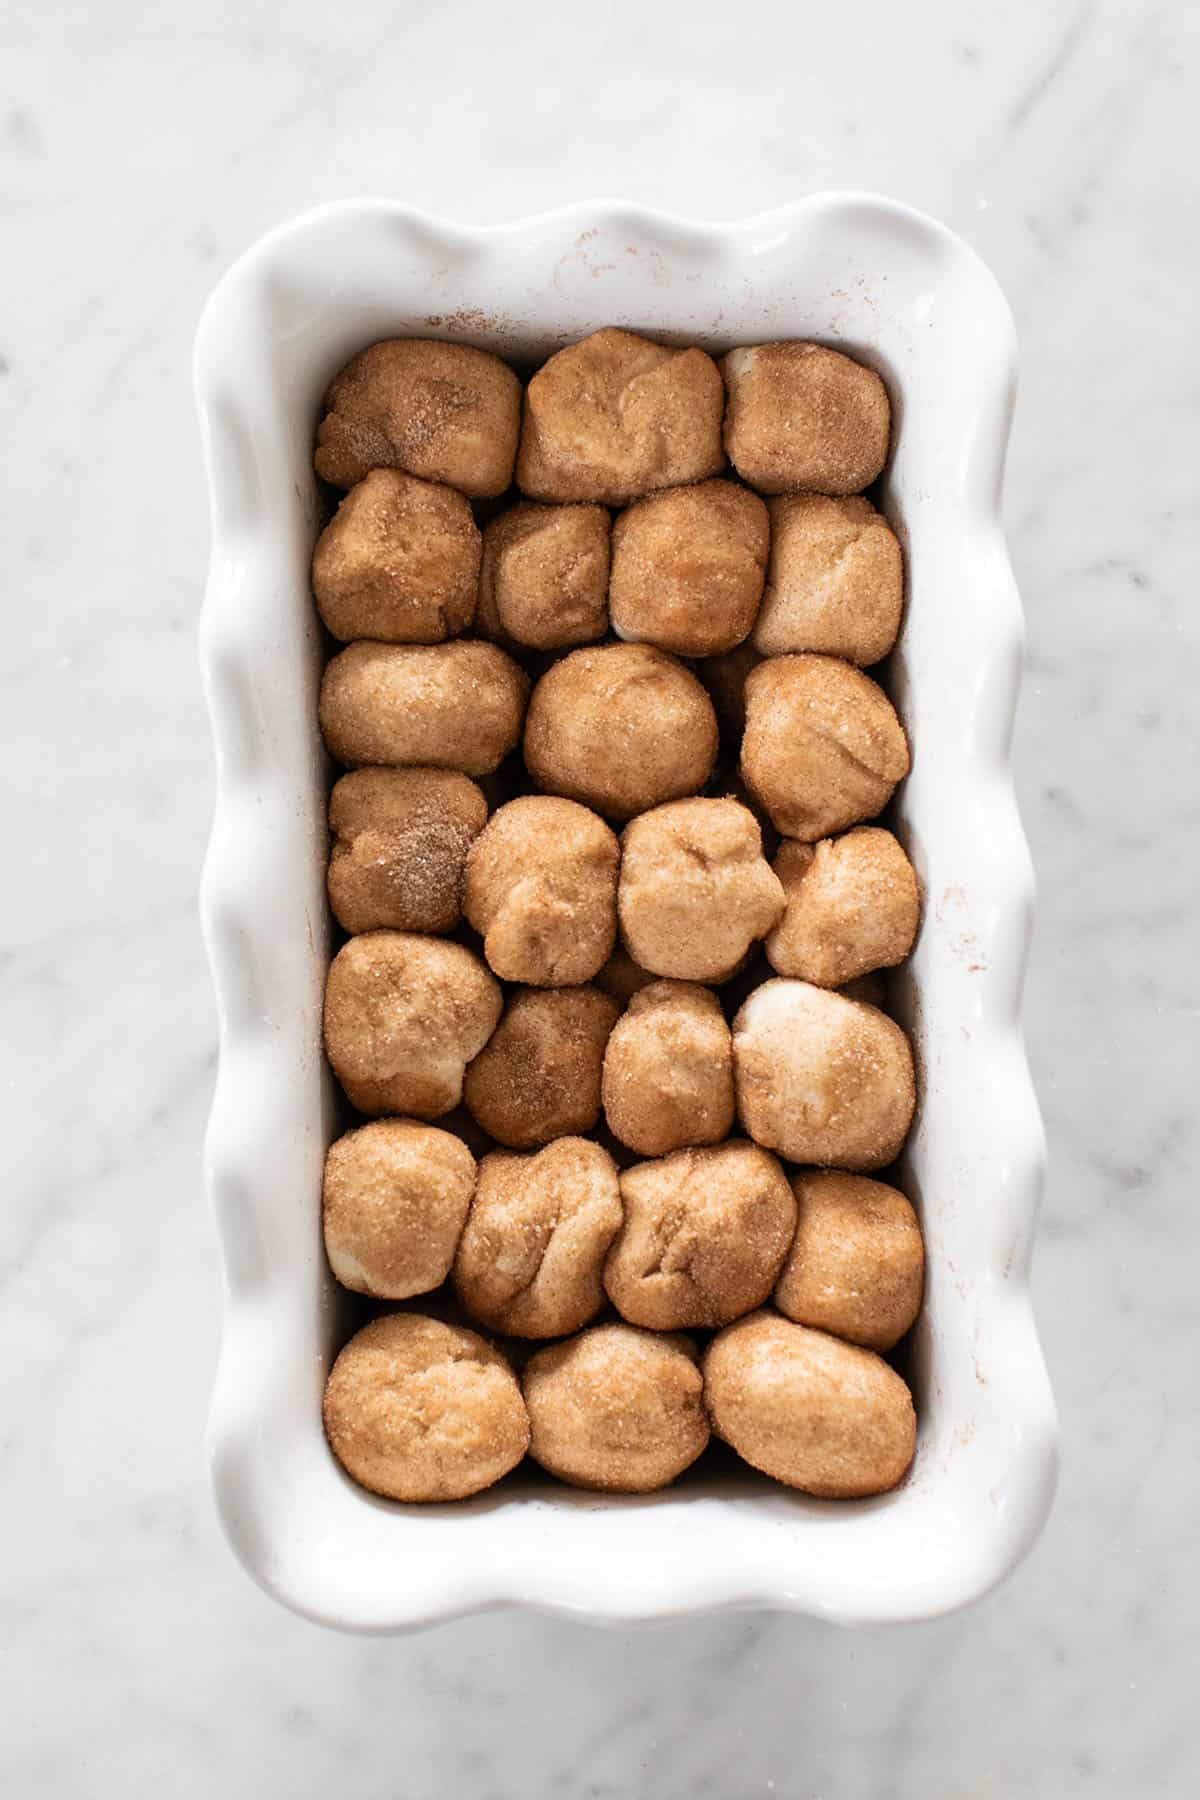 balls of dough rolled in cinnamon and sugar  to make an easy monkey bread recipe.